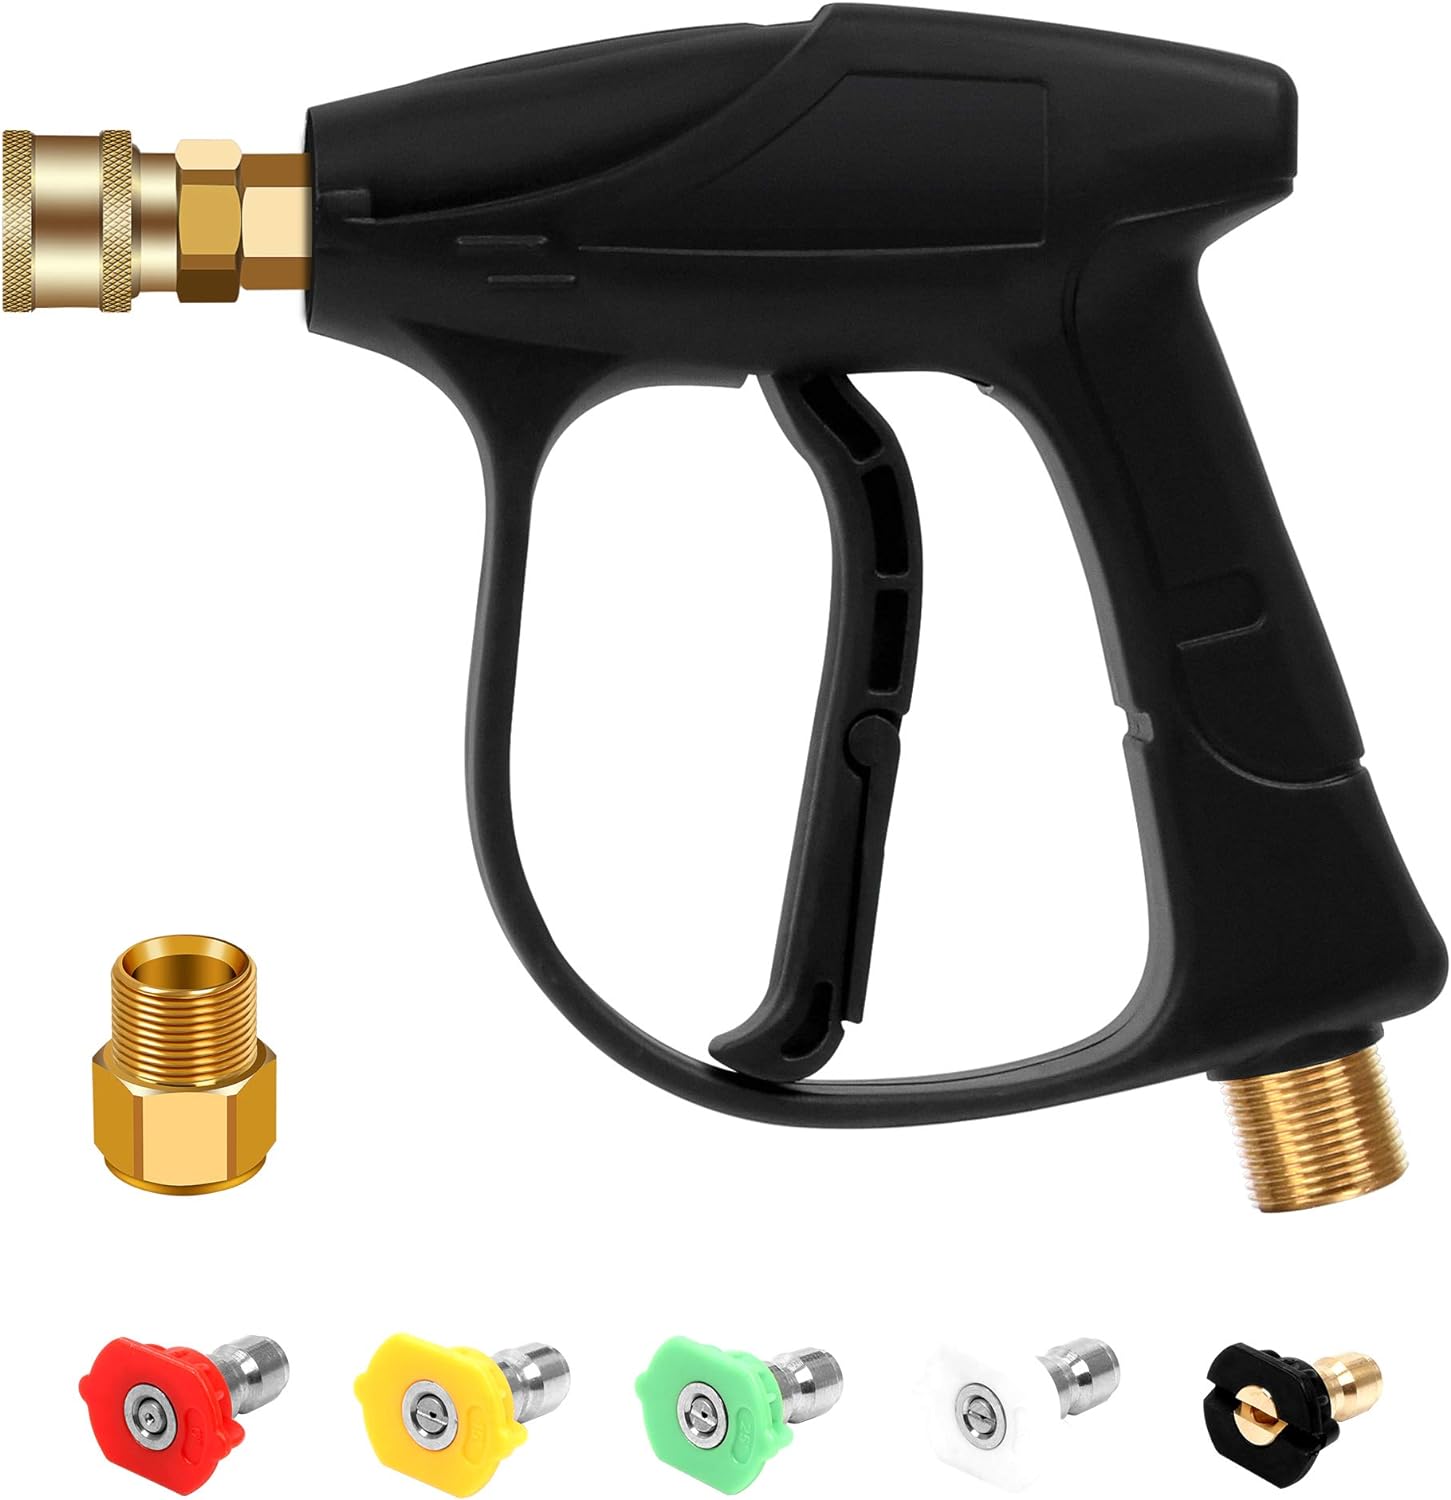 BEETRO High Pressure Washer Gun 4350PSI, Car Washer Gun with 5 Nozzles and M 22 Brass Coupler for Pressure Power Washers